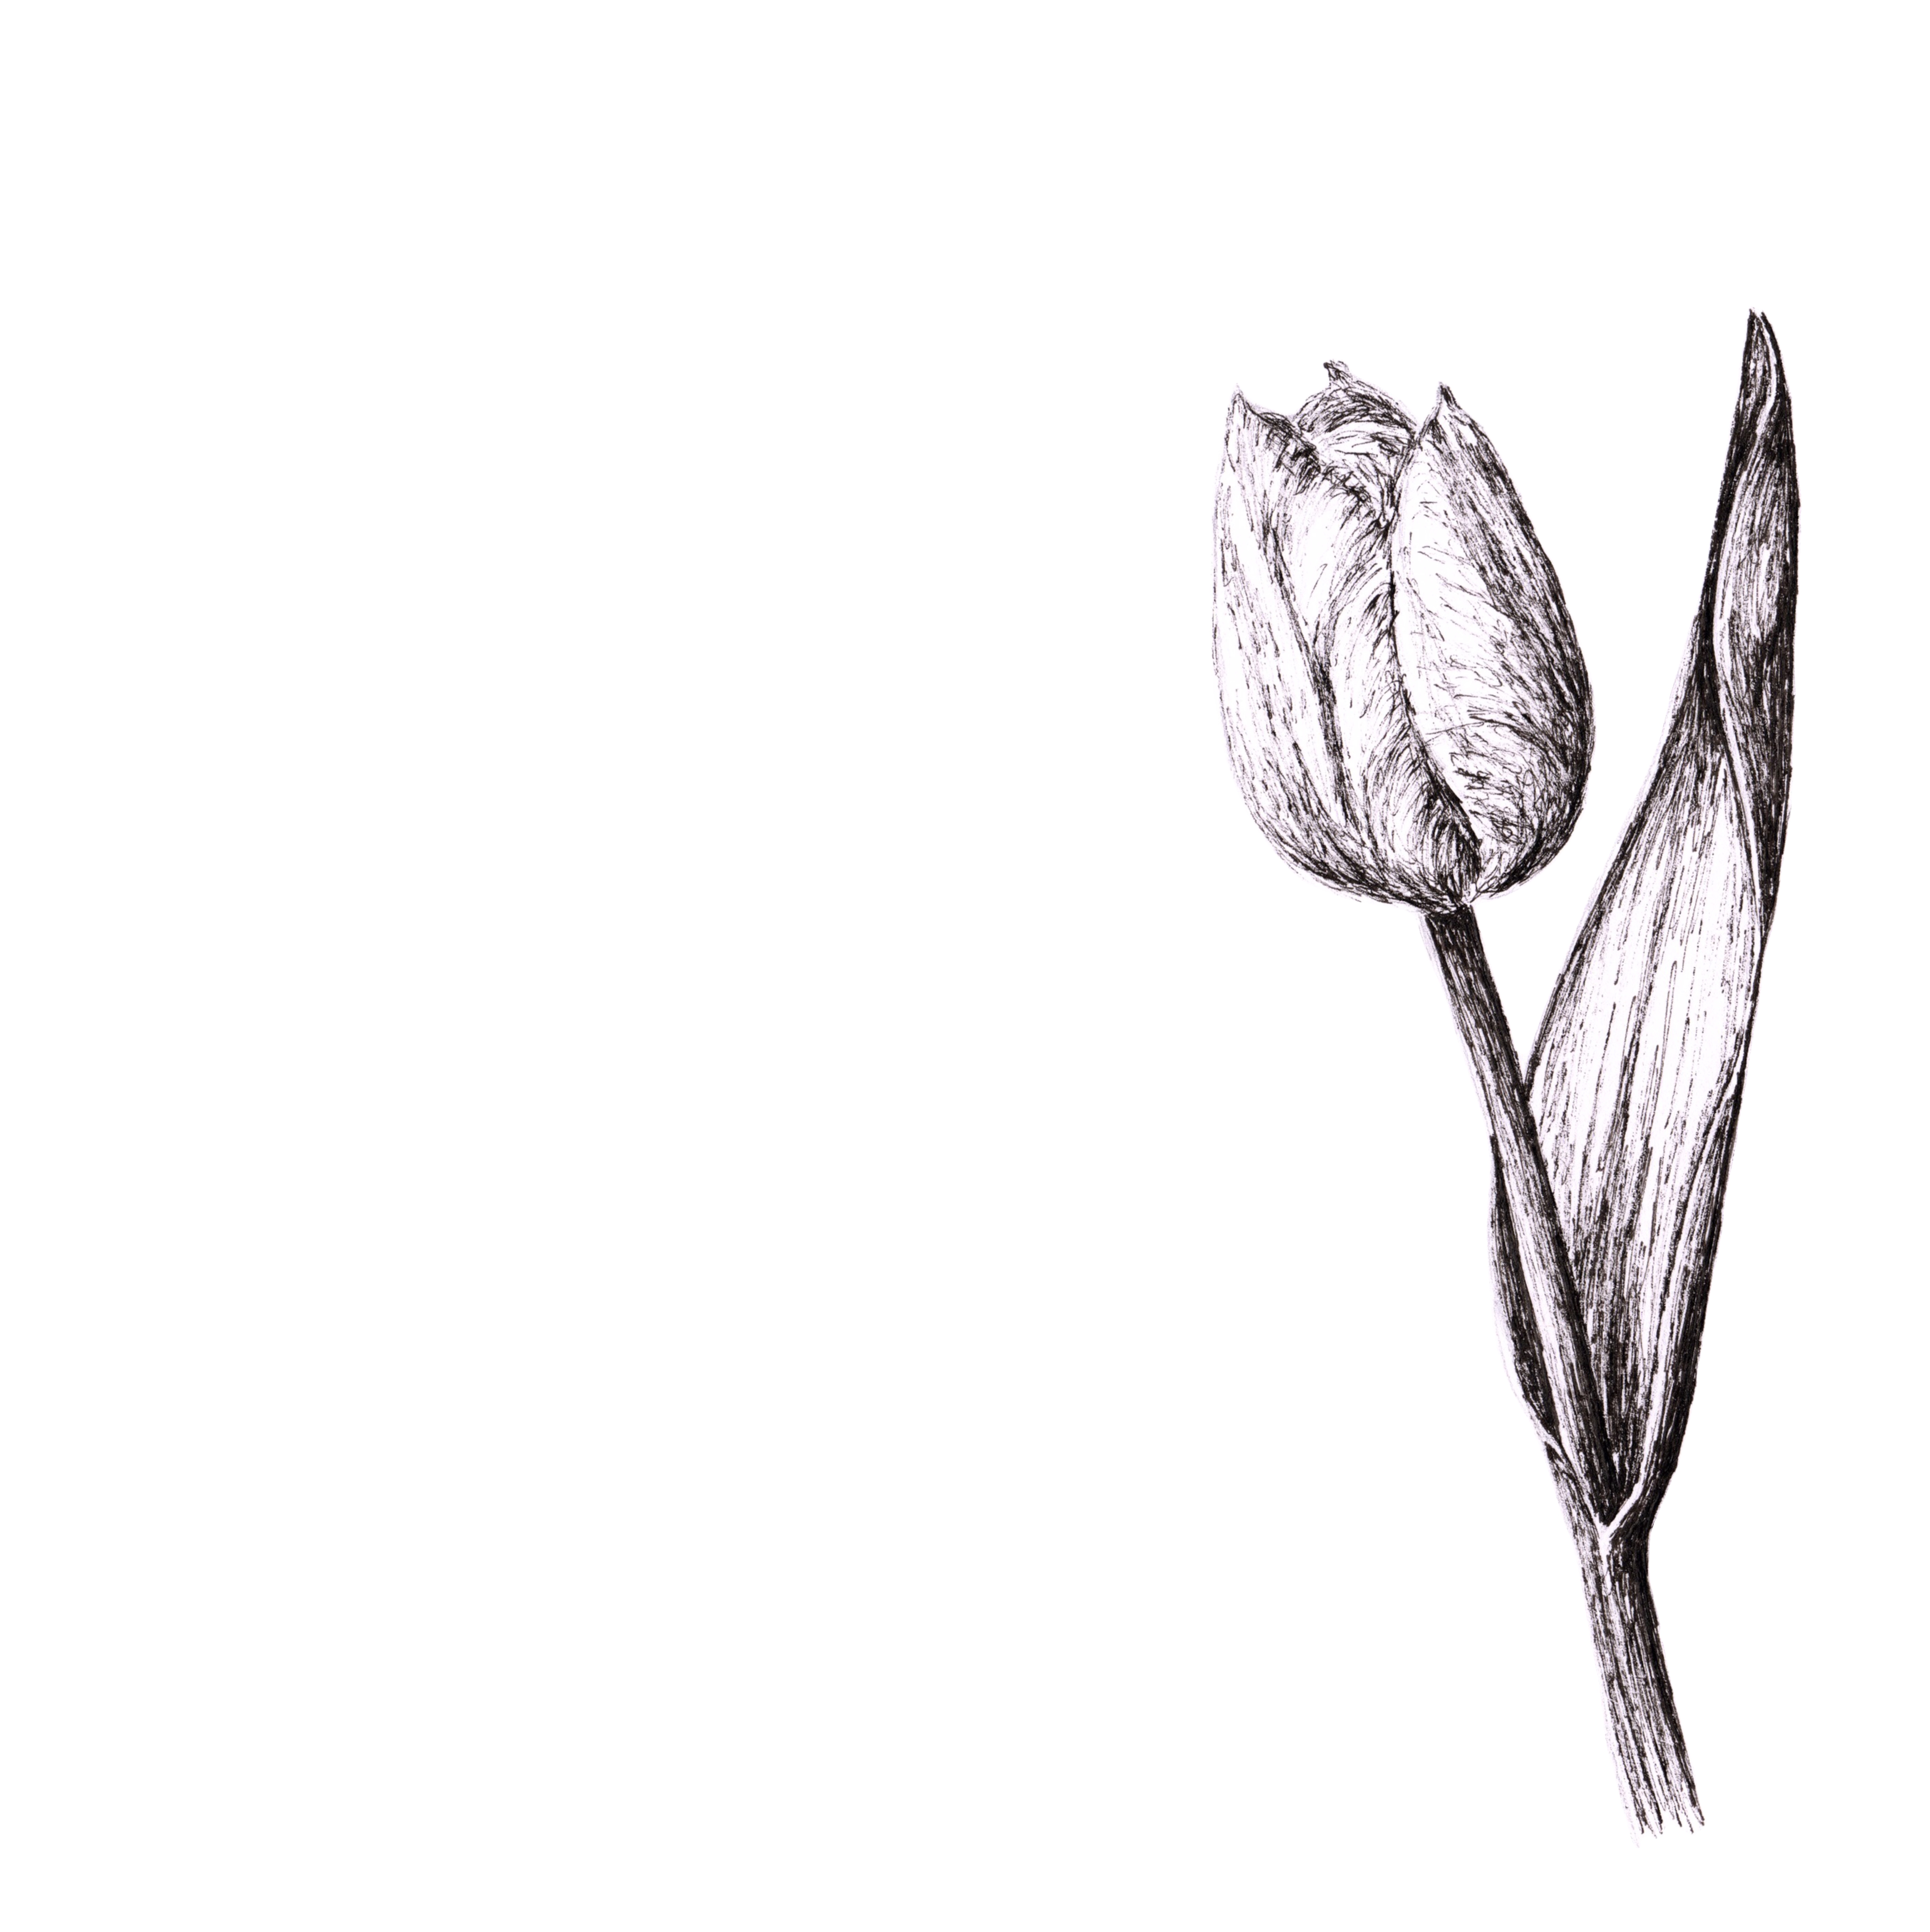 Tulip pen and ink illustration by Louisa Hill